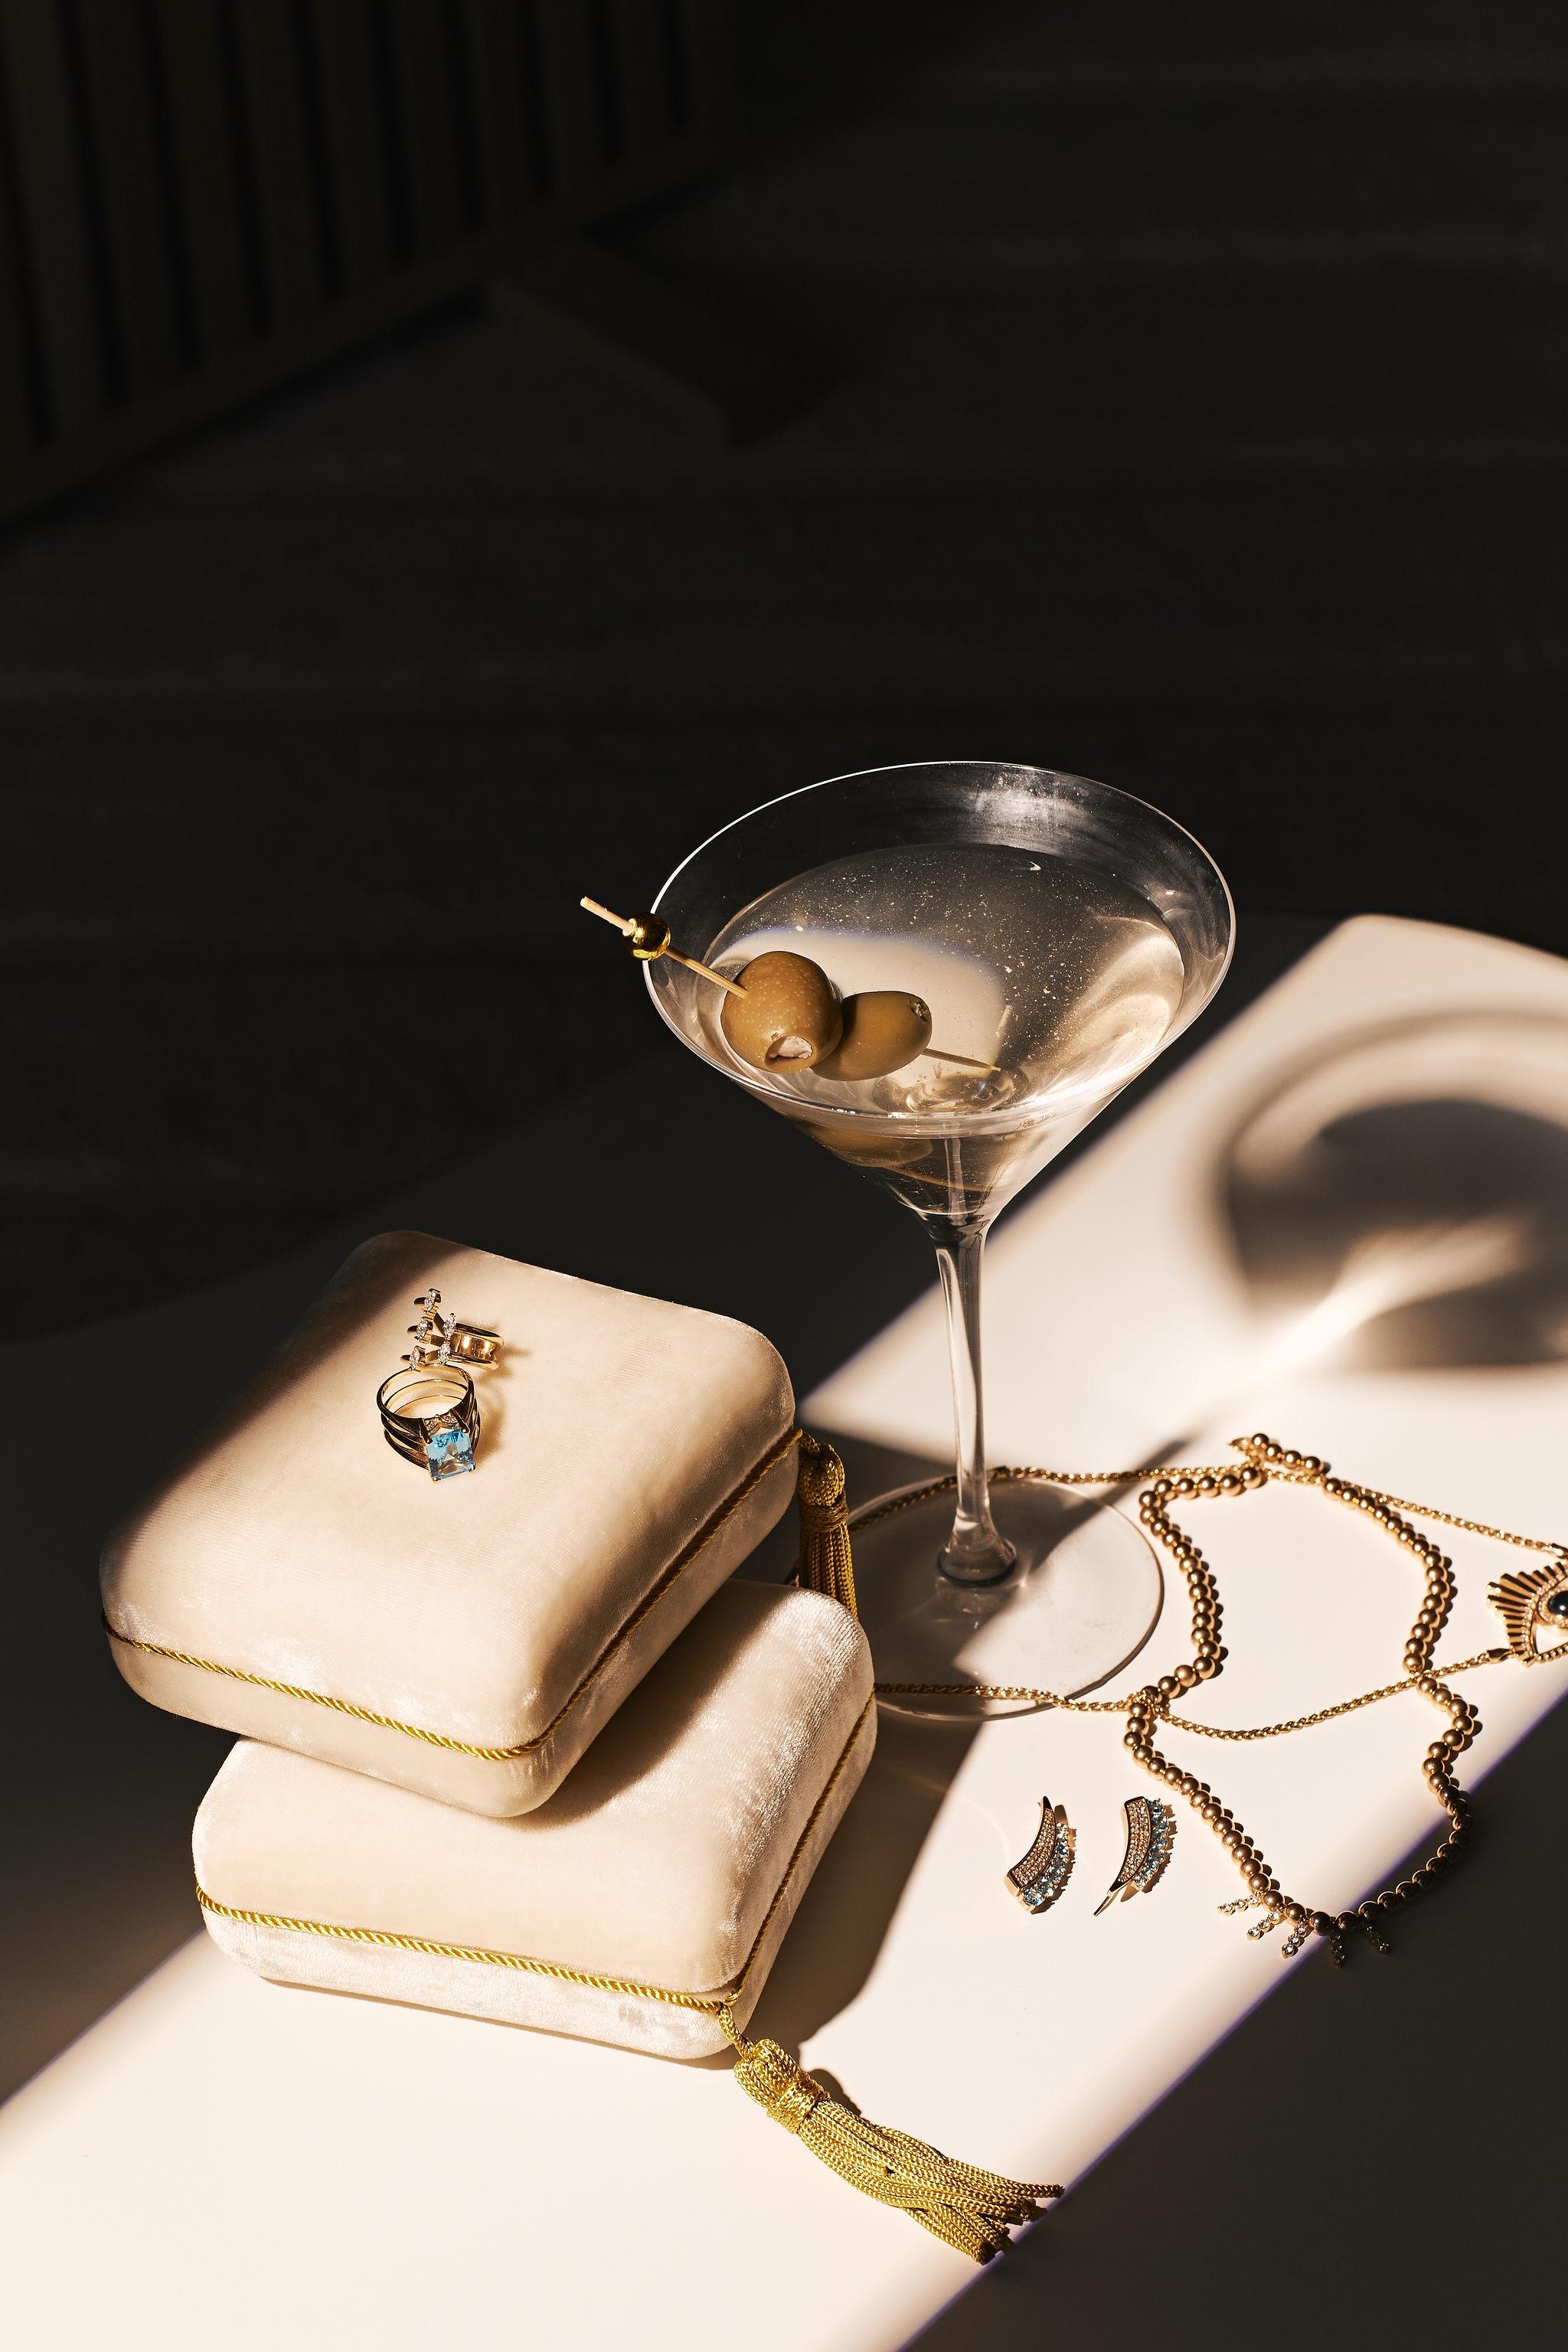 Whether at home, on the go, or traveling, make sure your precious rings are always safe with this white crushed velvet jewelry box pochette case with gold tassel detailing. The perfect size for your vanity, handbag or luggage. Featuring a ring roll